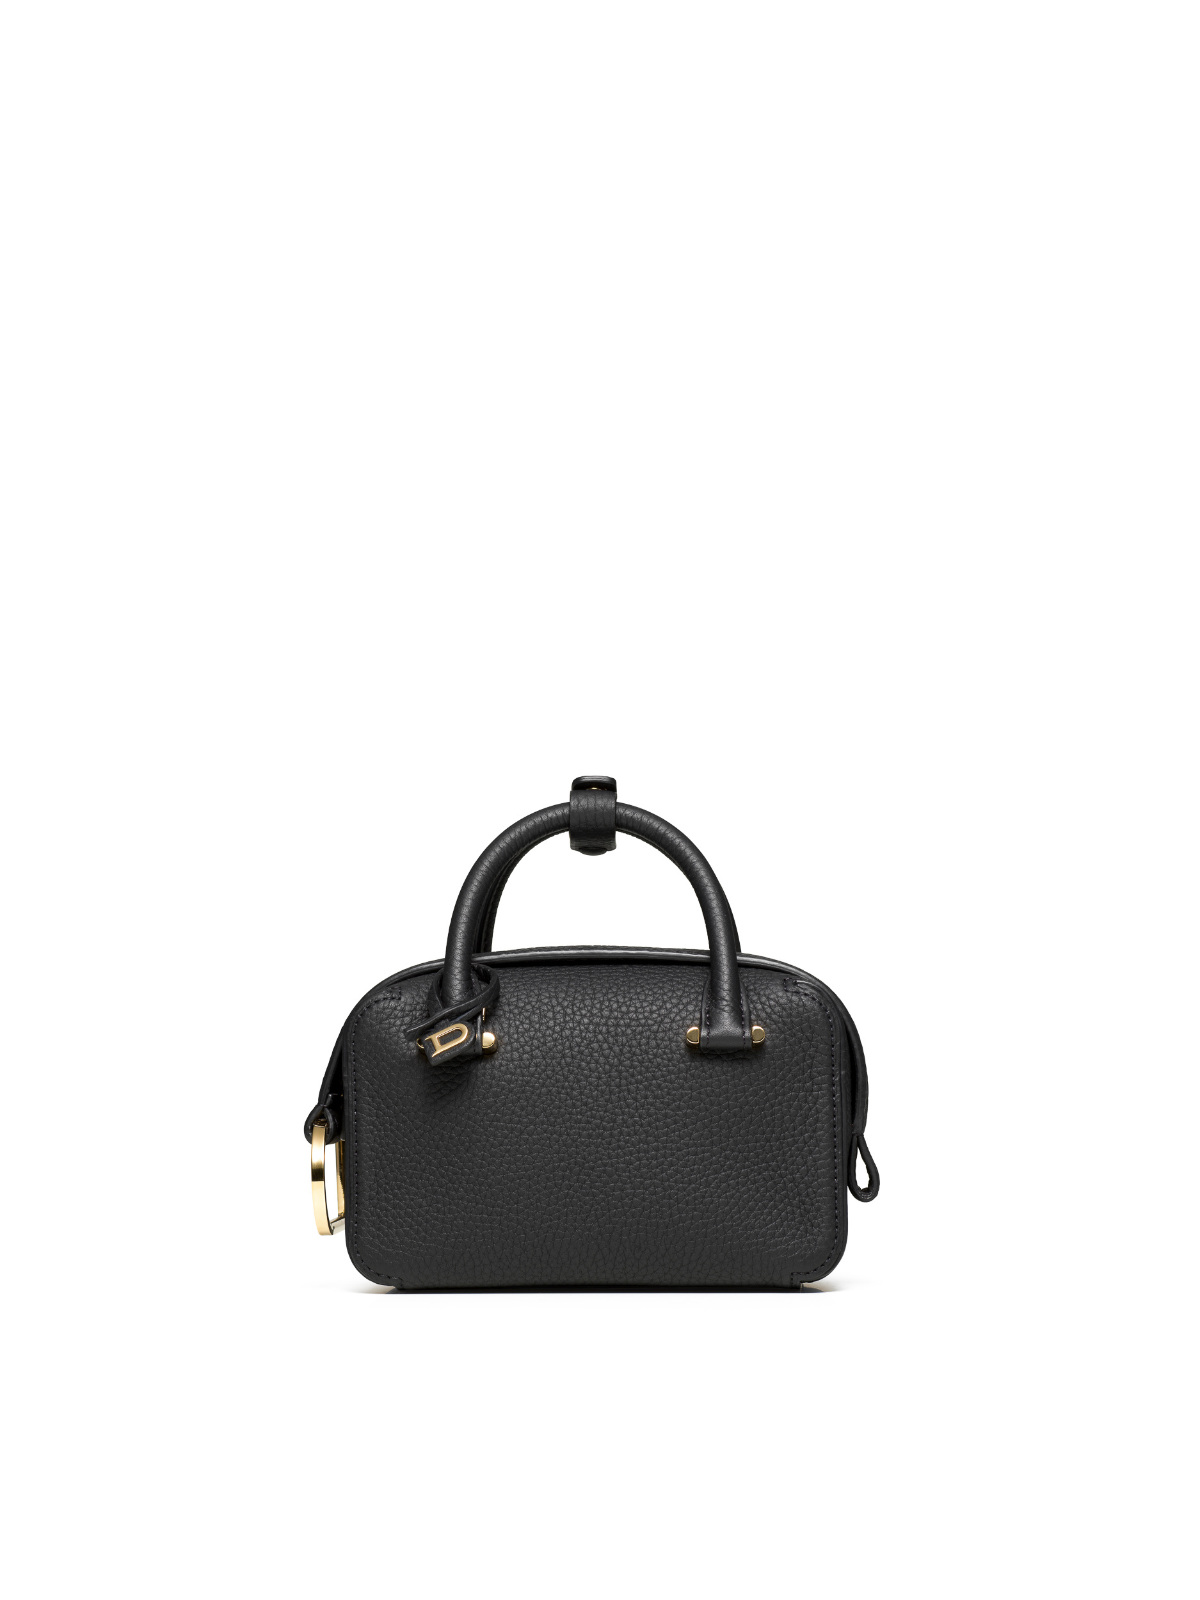 Get Playful With Delvaux's Pompons Bags - BAGAHOLICBOY